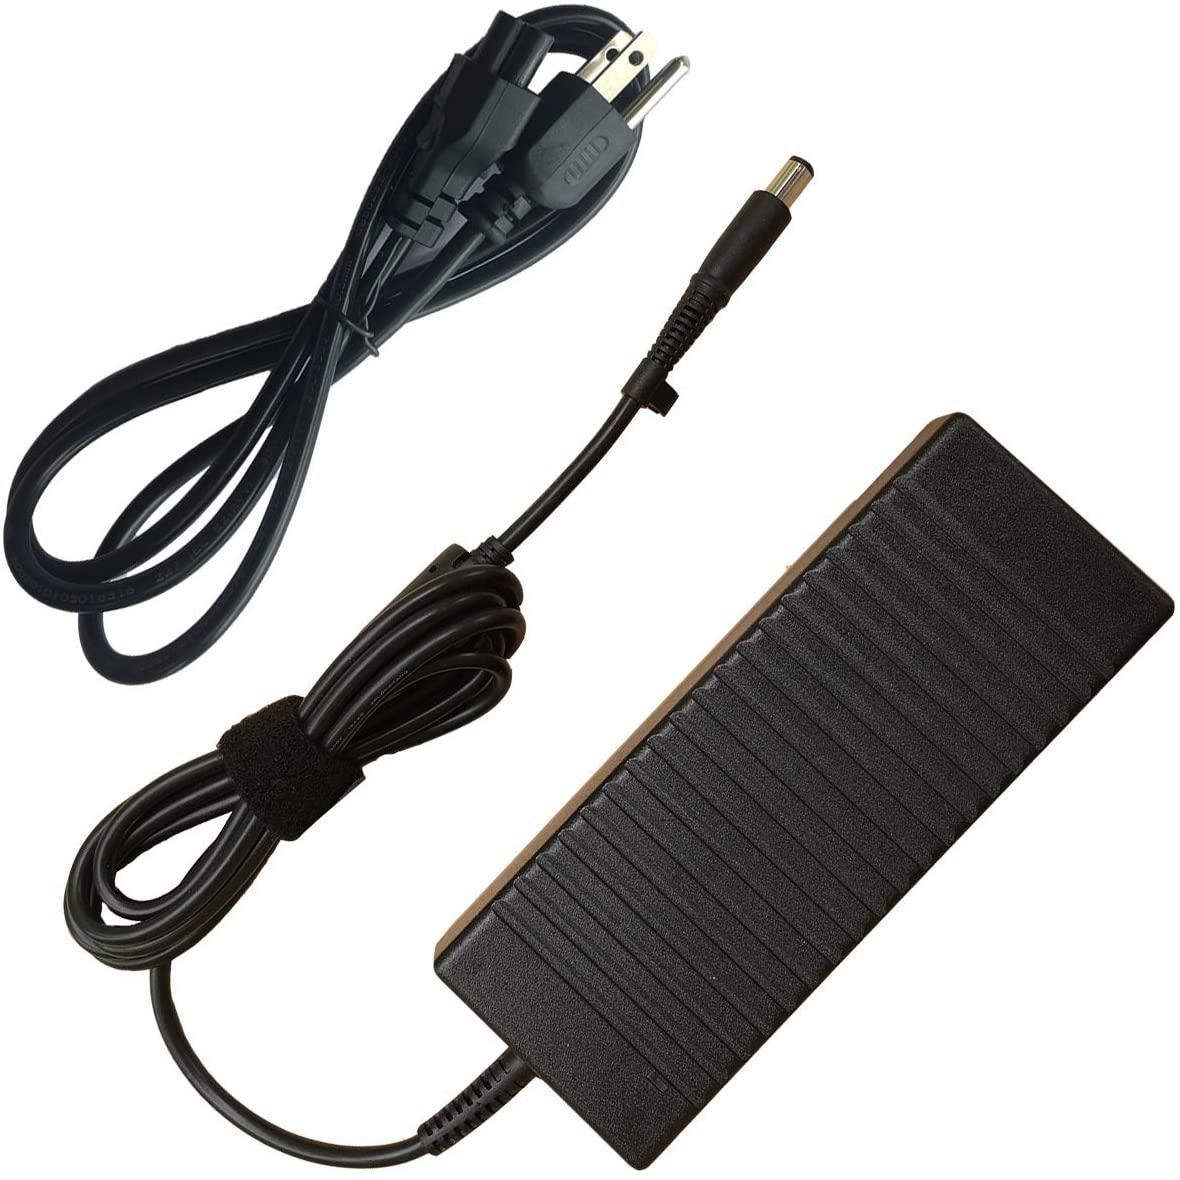 18.5V 6.5A 120W 7.4*5.0mm Laptop Adapter compatible with HP Pavilion DV4 DV6 DV7 DV8 PPP017H PPP016H Notebook